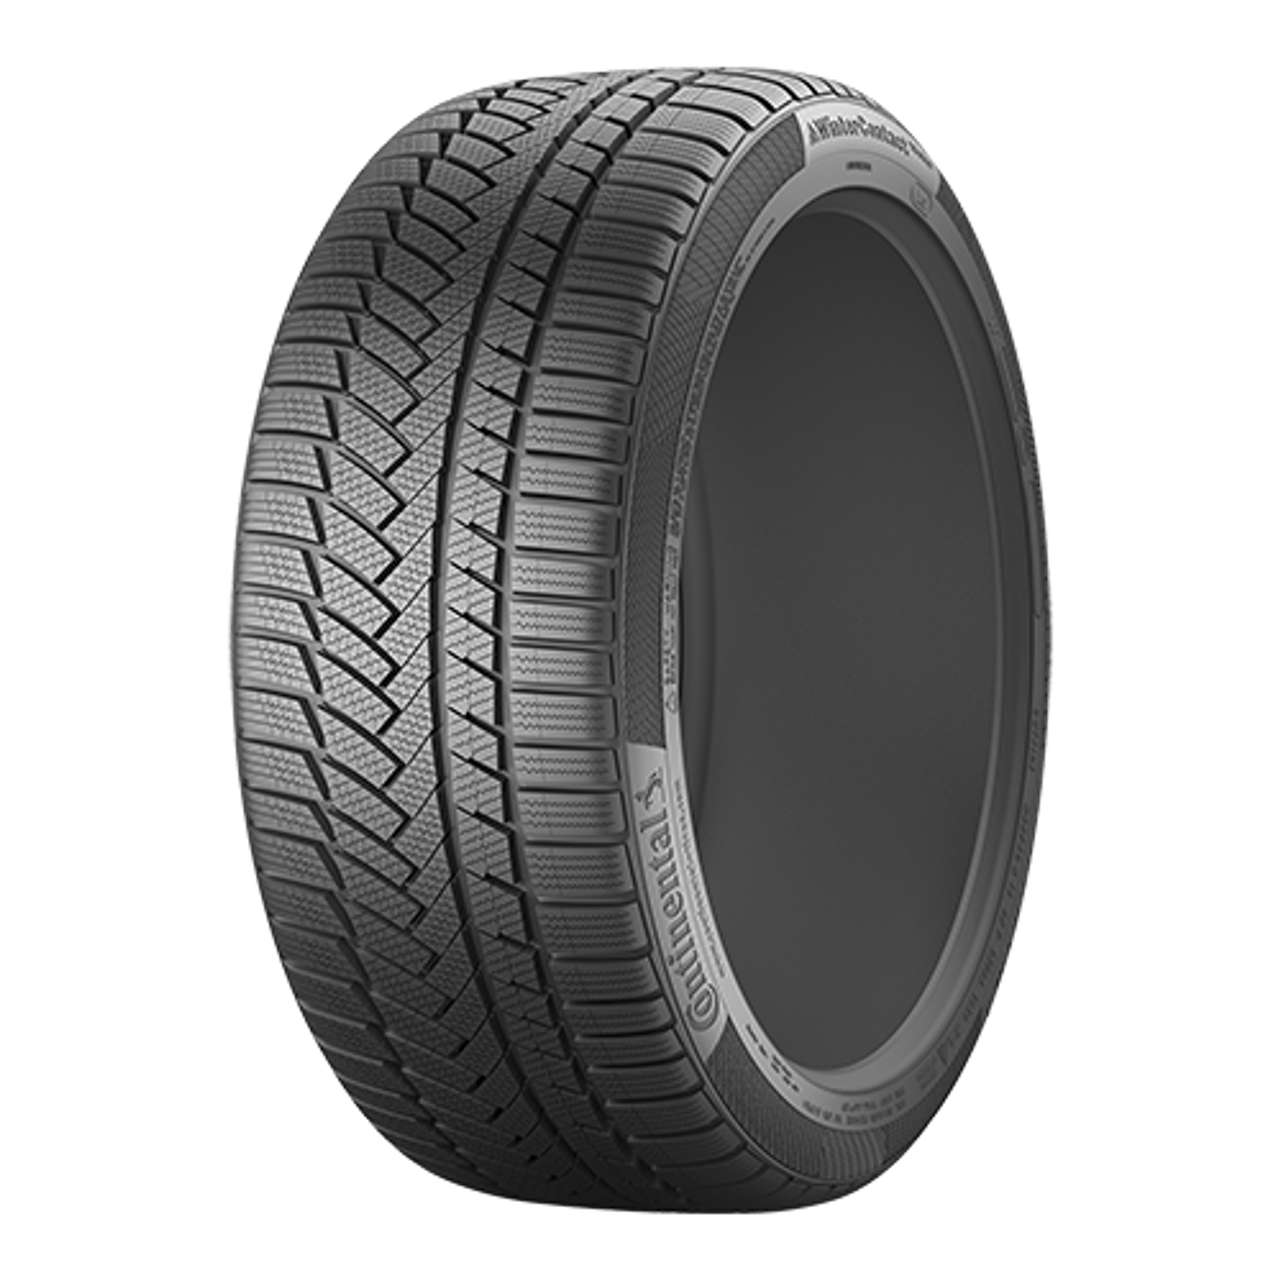 CONTINENTAL WINTERCONTACT TS 850 P 235/60R18 103T FR BSW